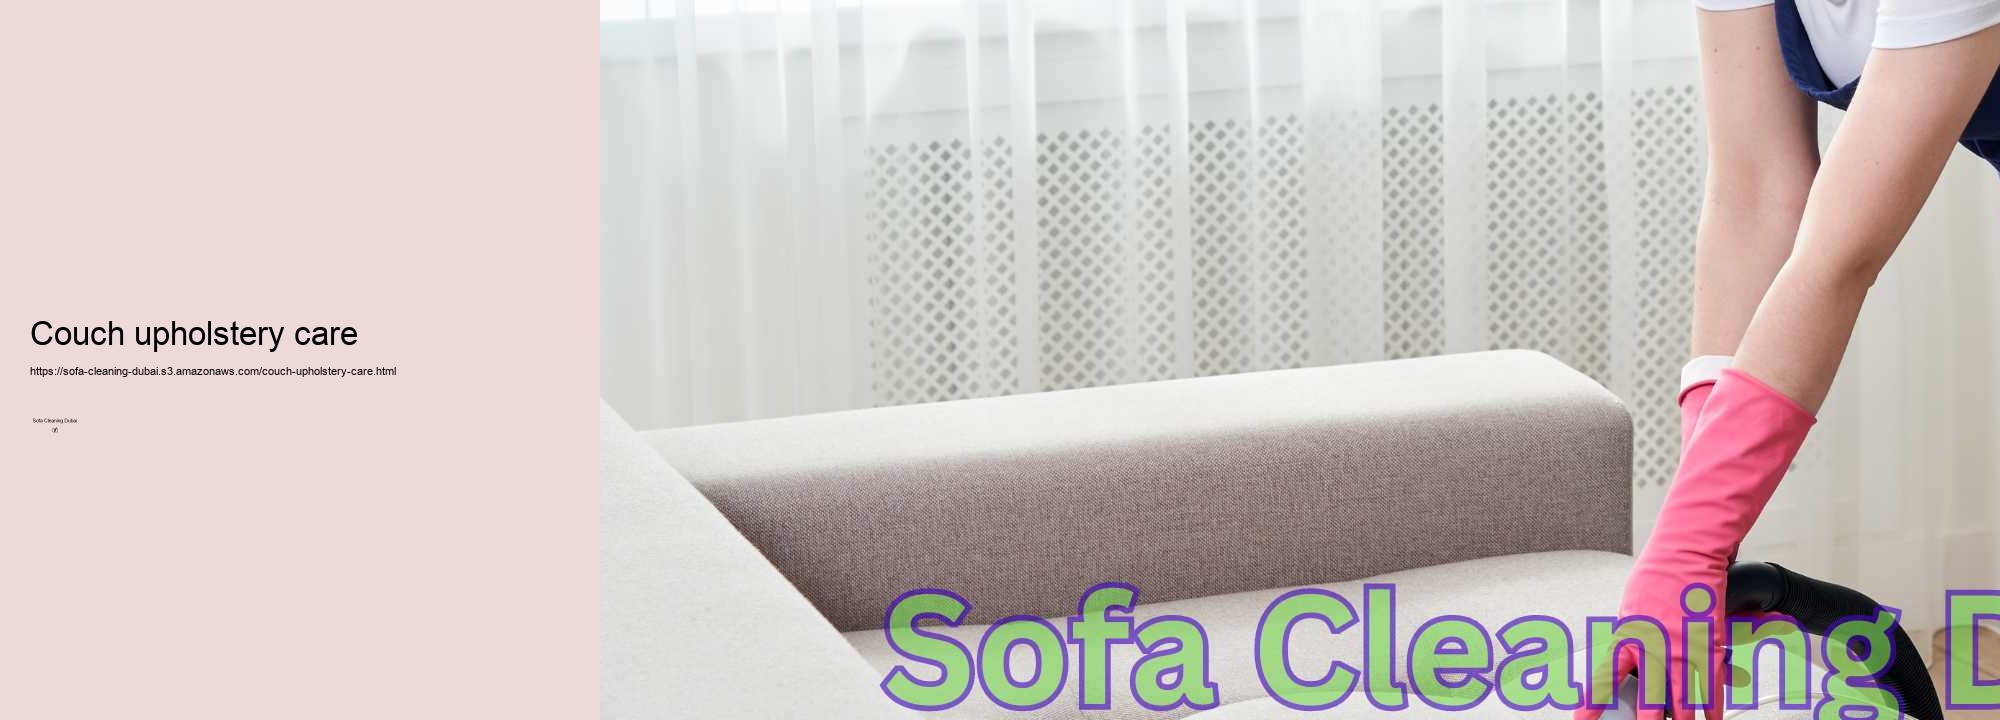 Couch upholstery care